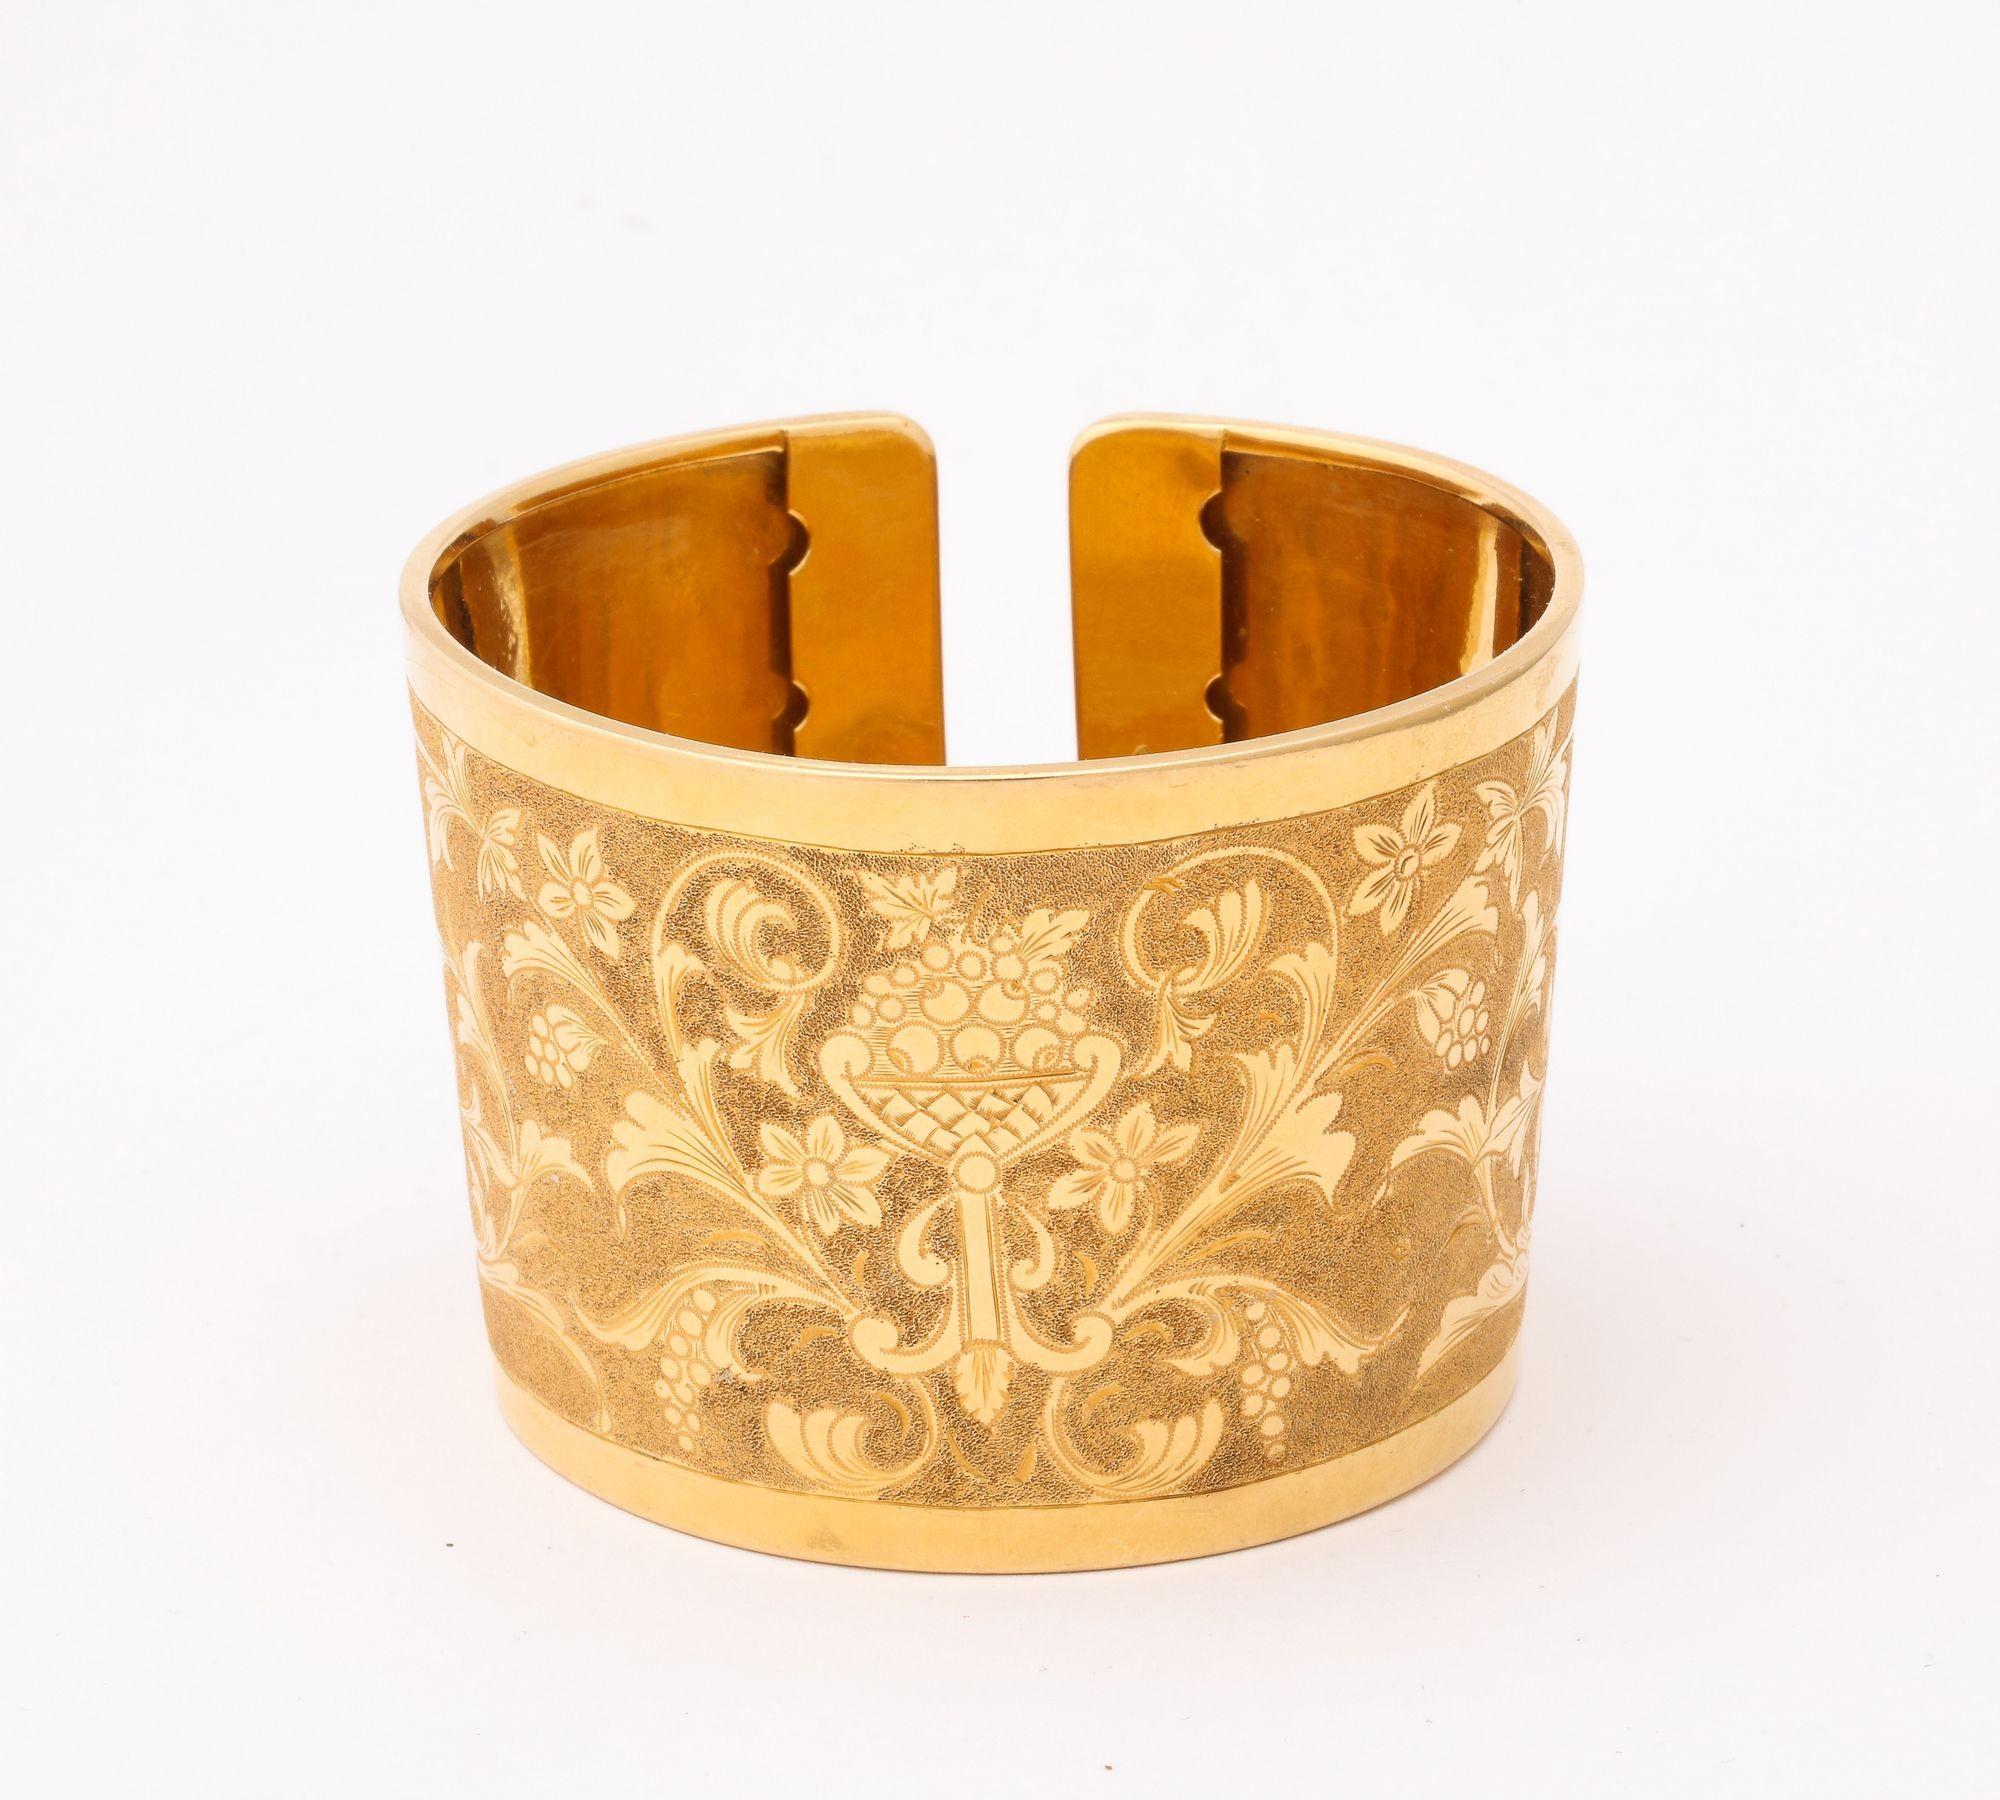 Italian Classical  Engraved Cuff With Two Tone Gold For Sale 1